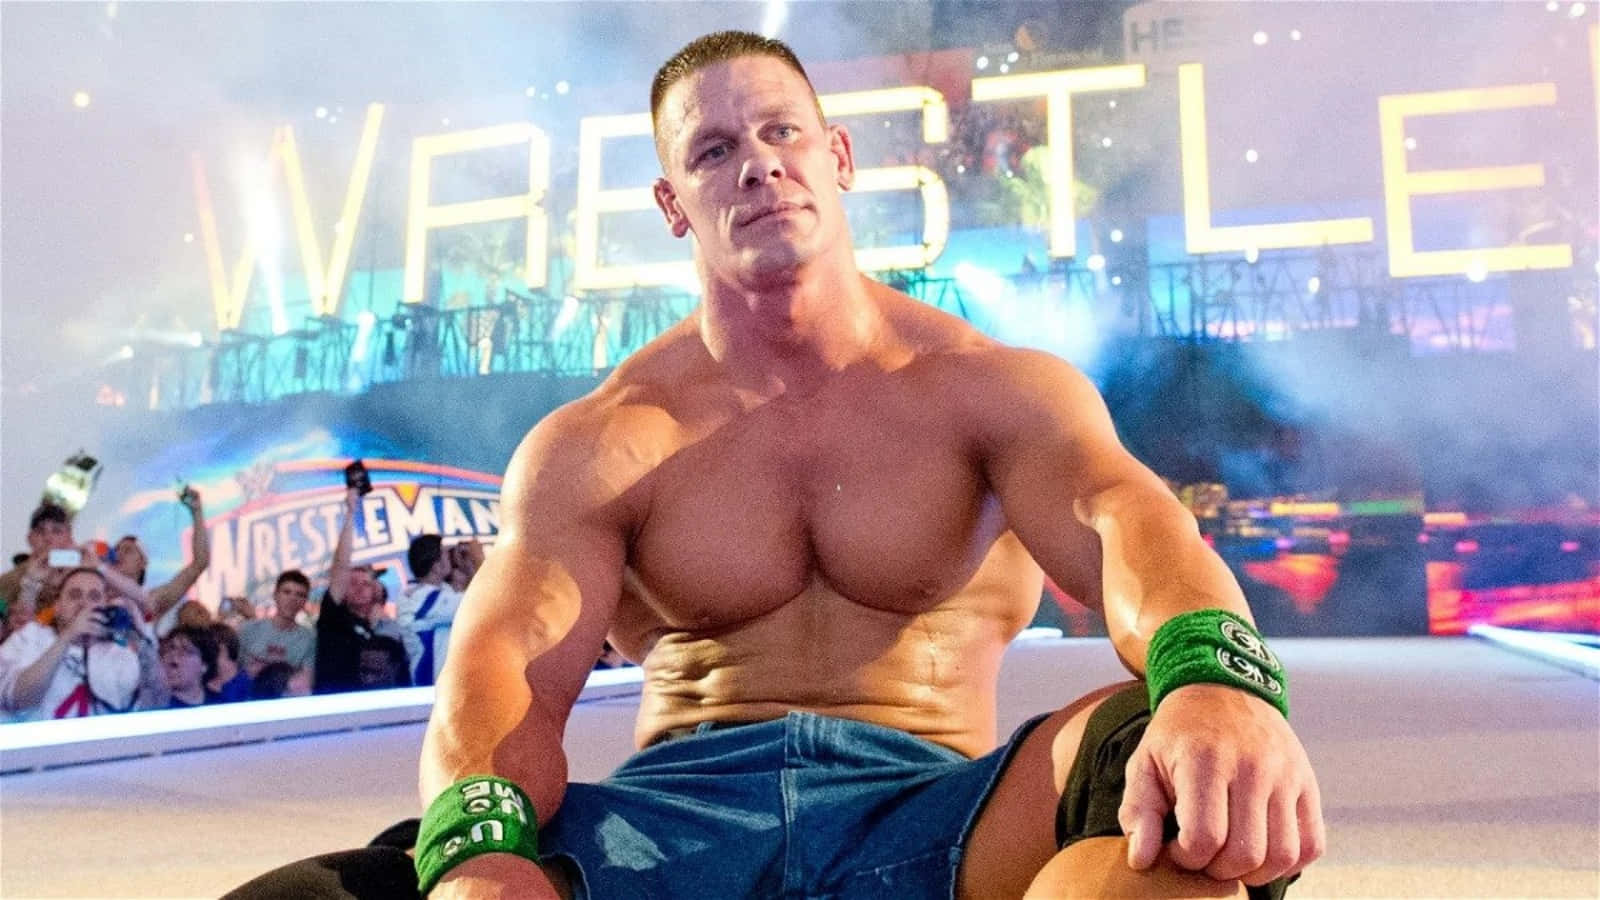 John Cena striking an action pose during a WWE event